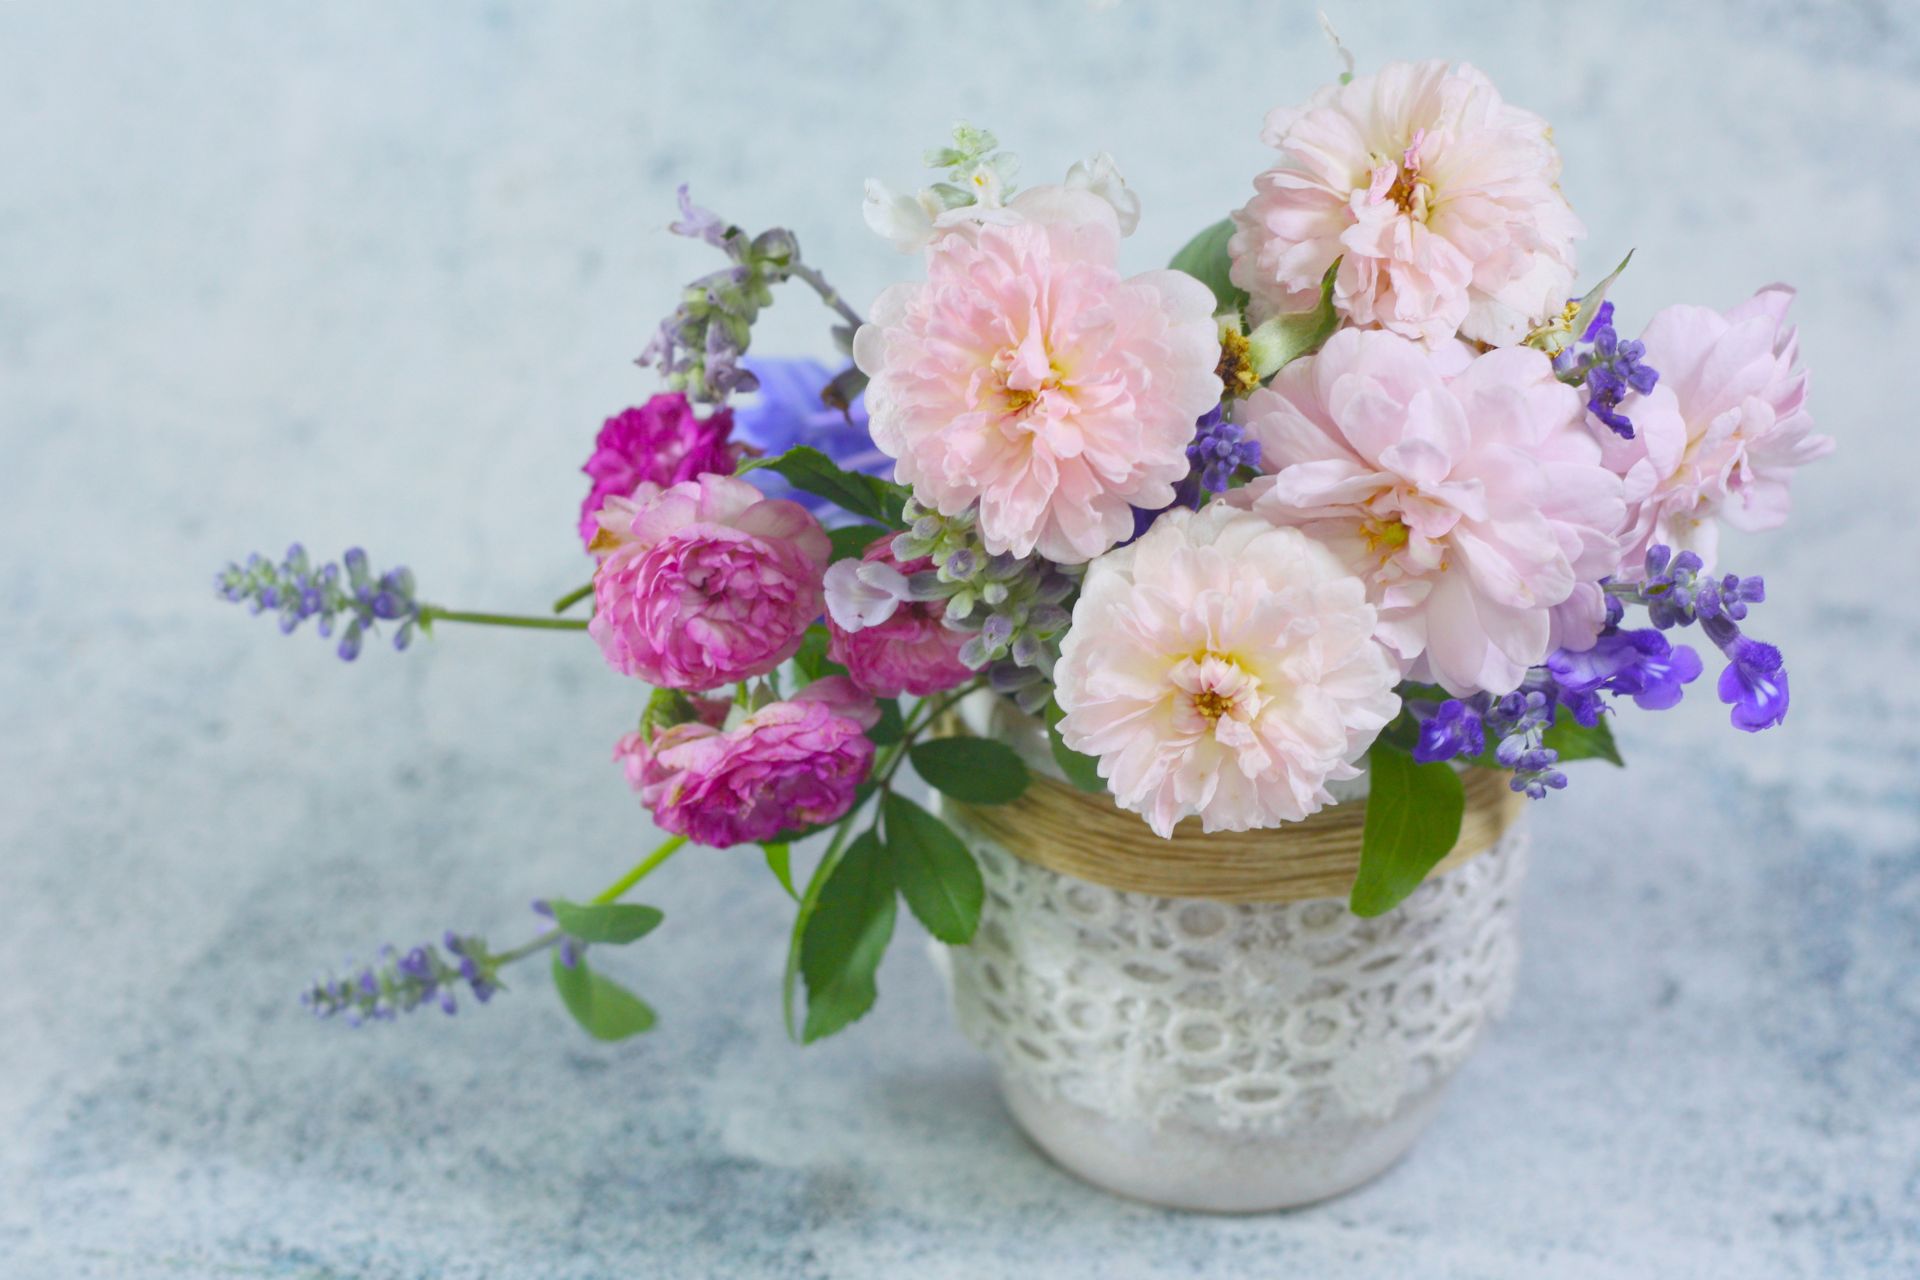 How to Choose the Right Vase for Flowers